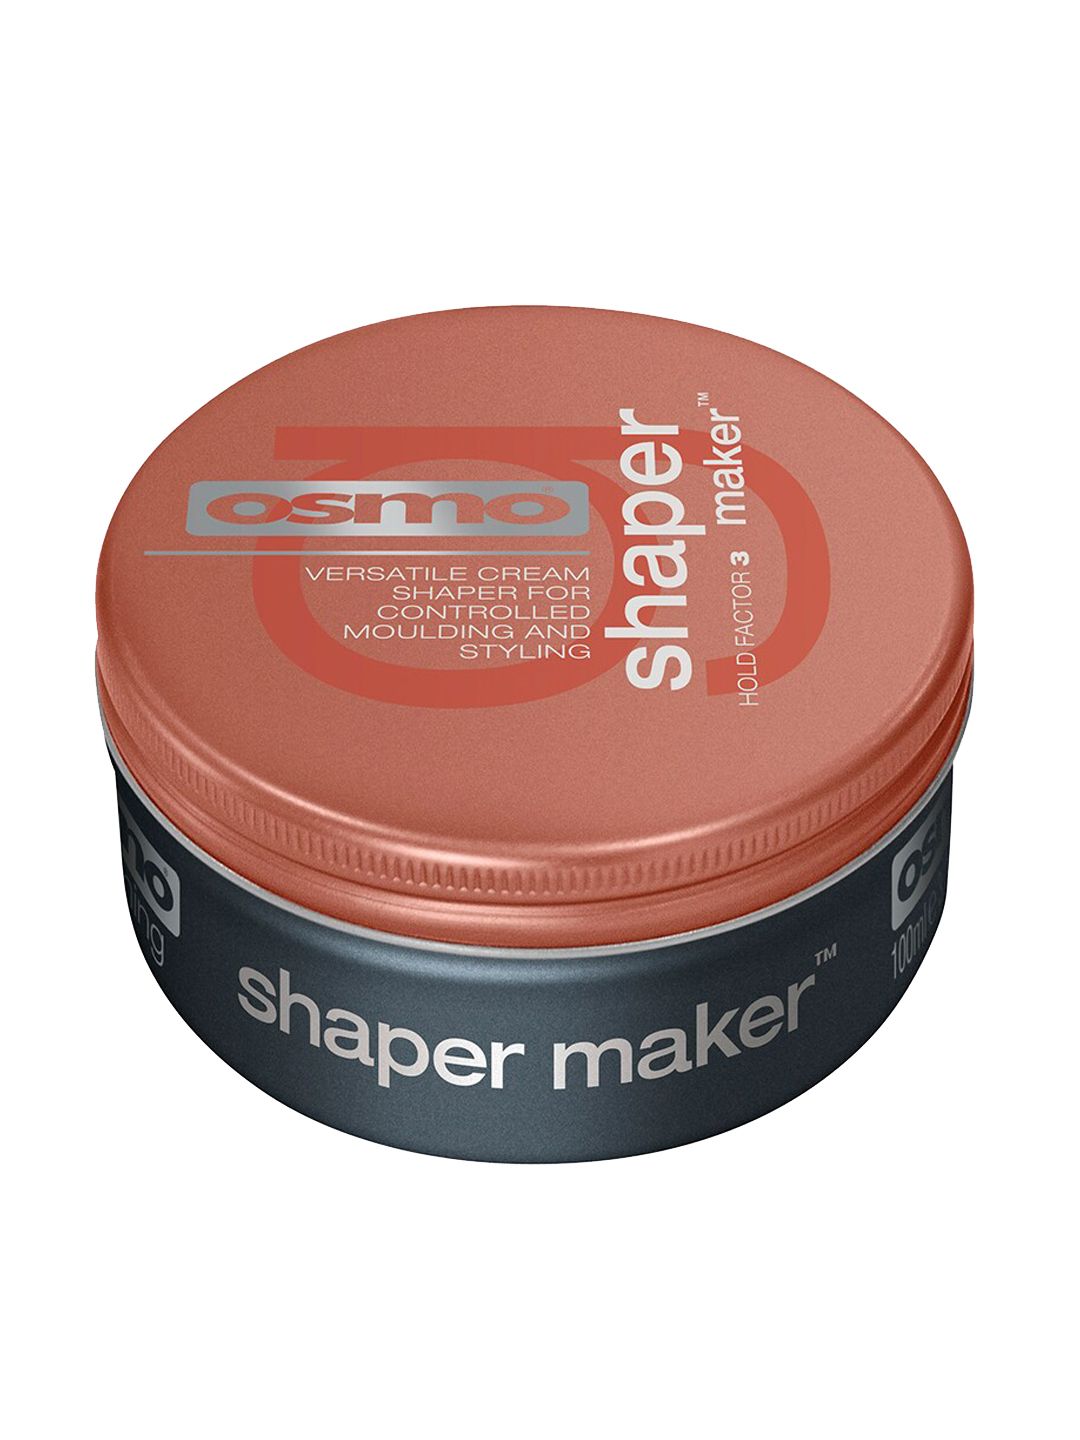 osmo Shaper Maker Hair Styling Cream - 100ml Price in India